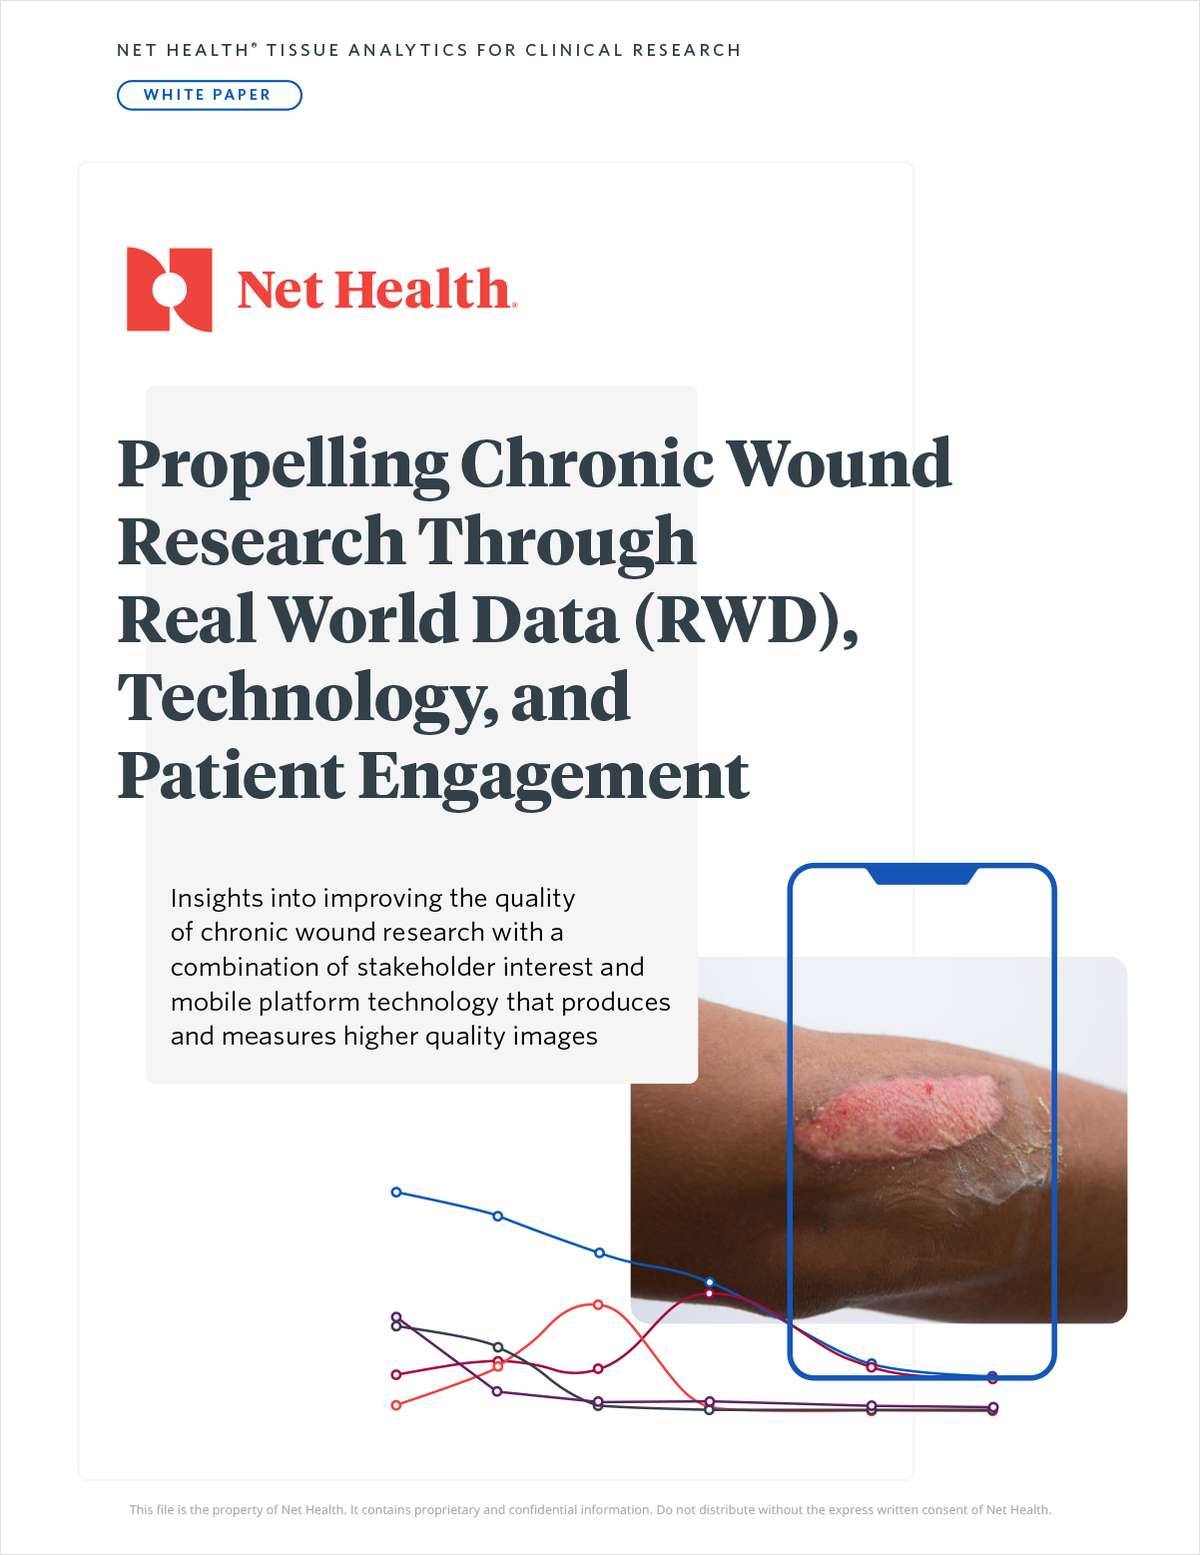 Accelerate Chronic Wound Research Through Real World Data (RWD), Technology, and Patient Engagement